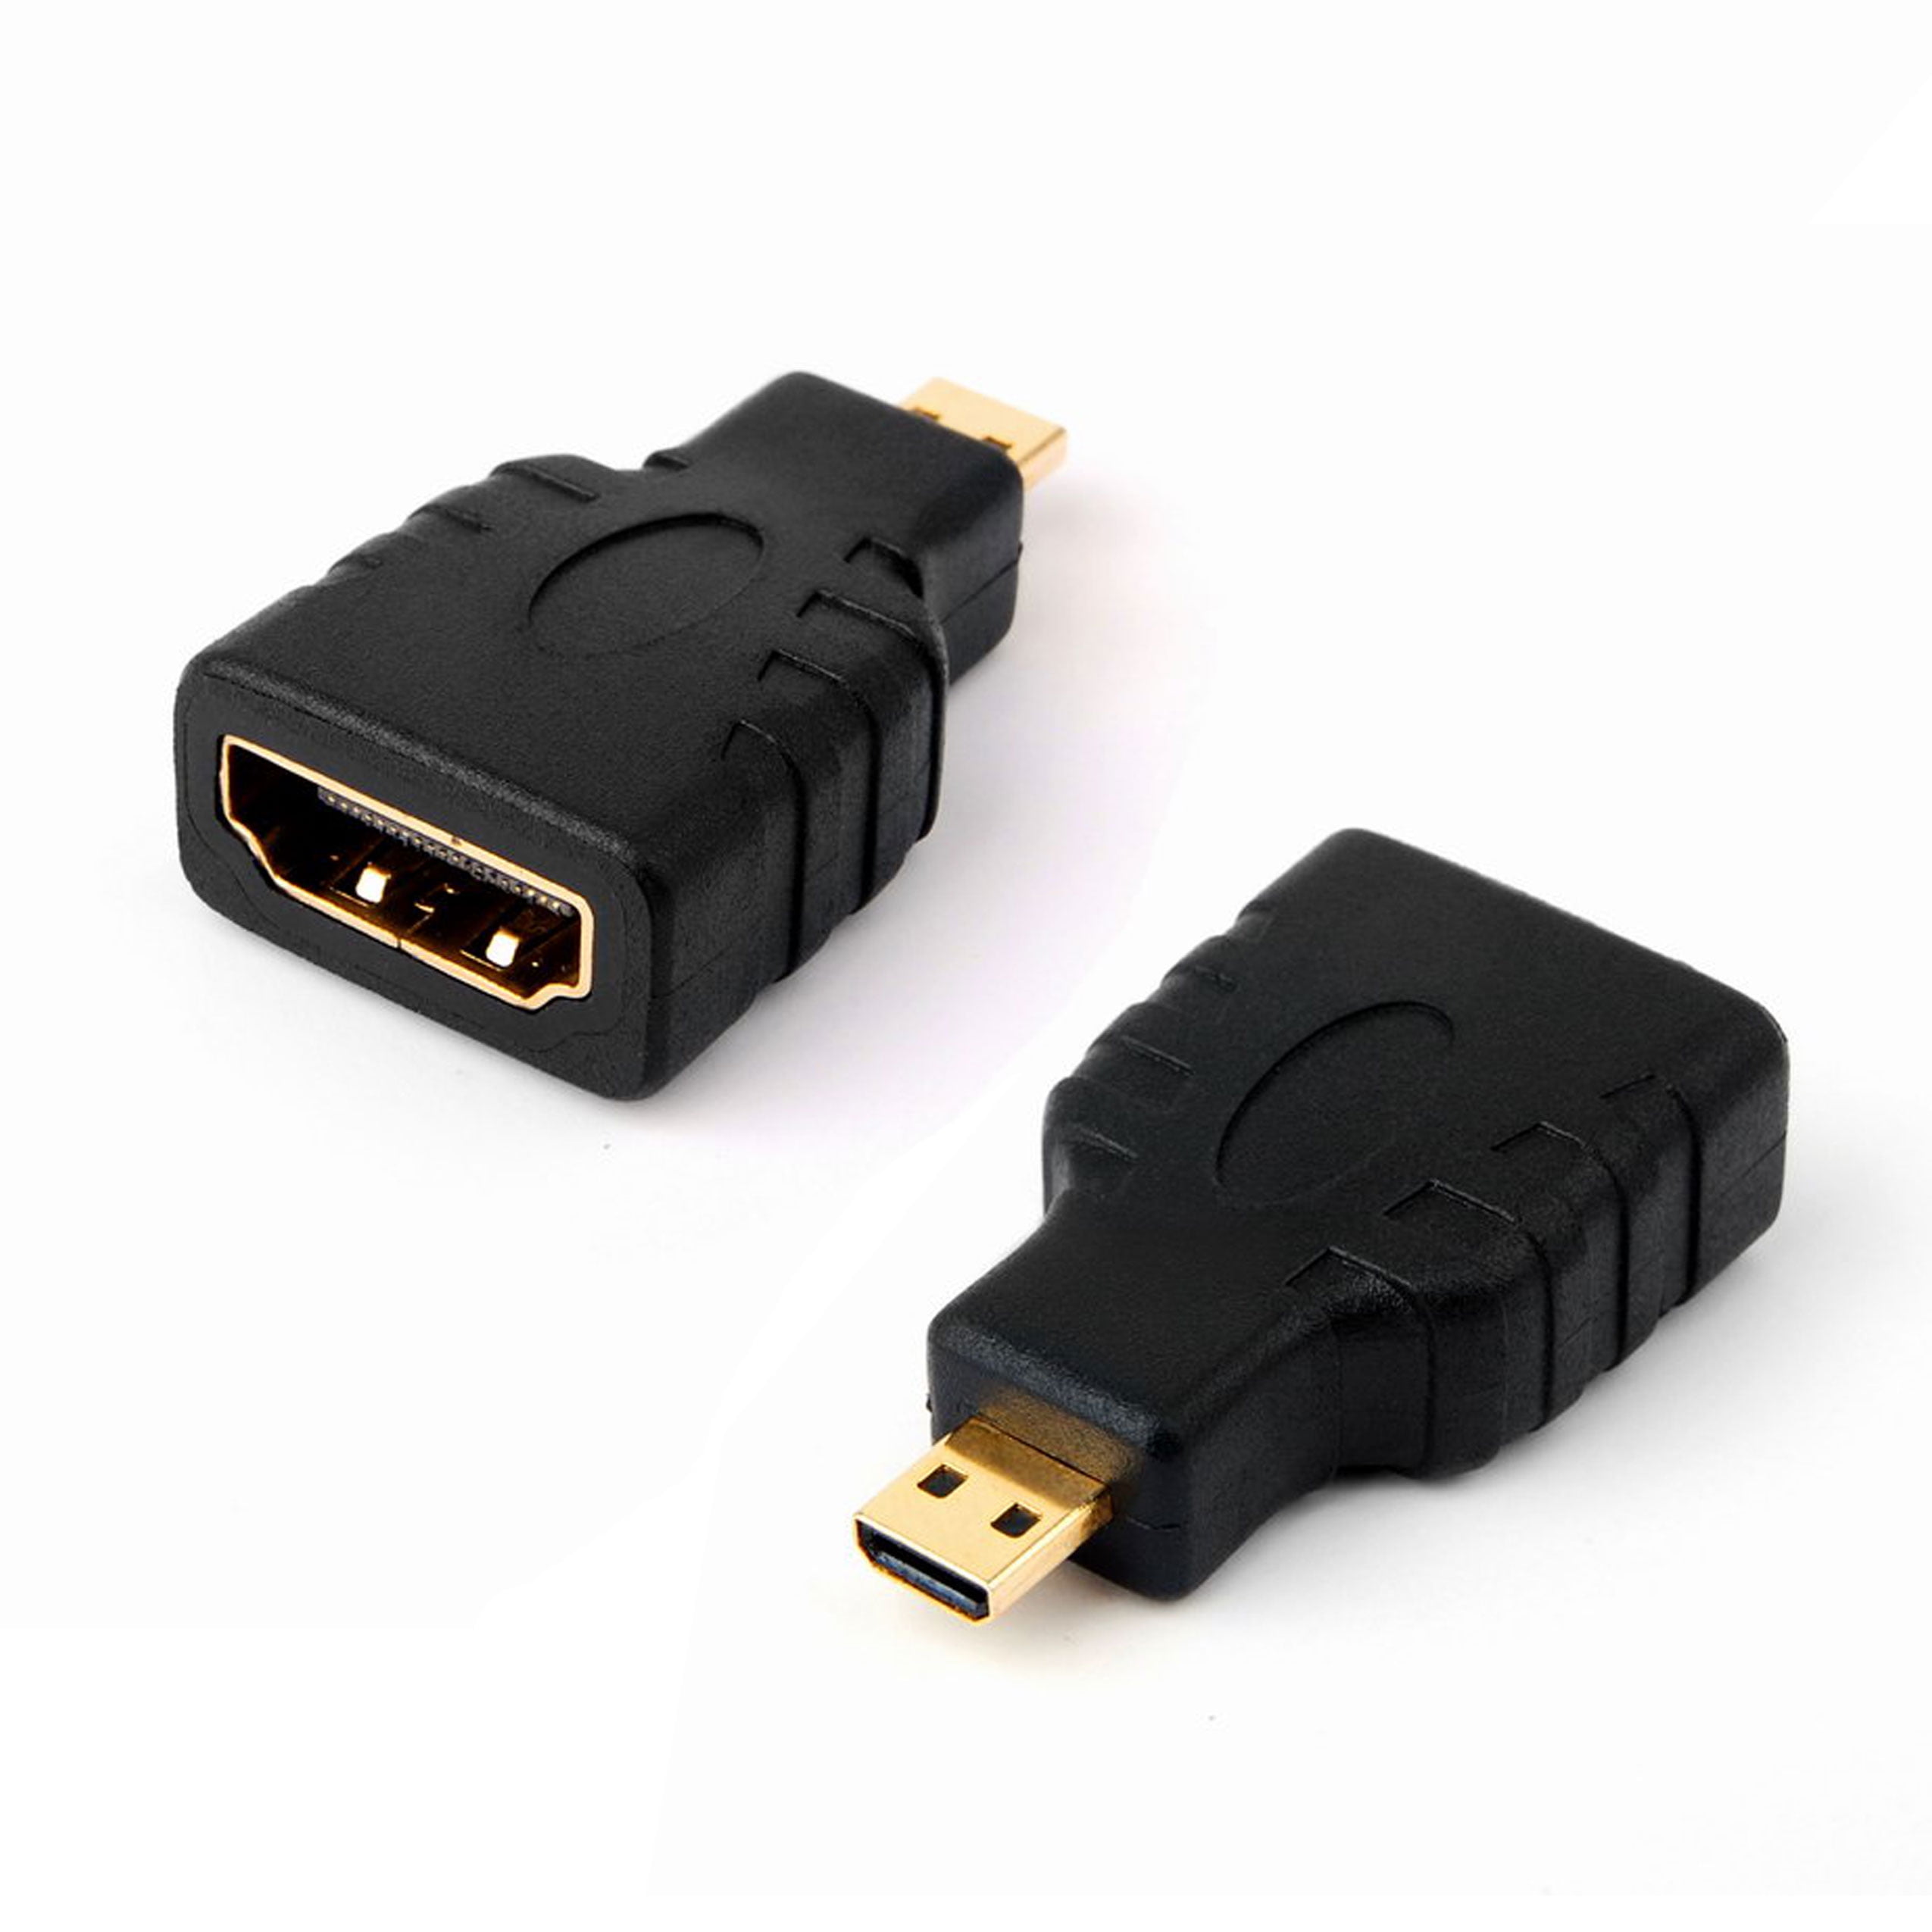 Micro HDMI Adapter - HDMI Female (Type-A) to Micro HDMI (Type-D), GearIT Gold Plated Connector Converter Adapter - Lifetime Warranty - Walmart.com